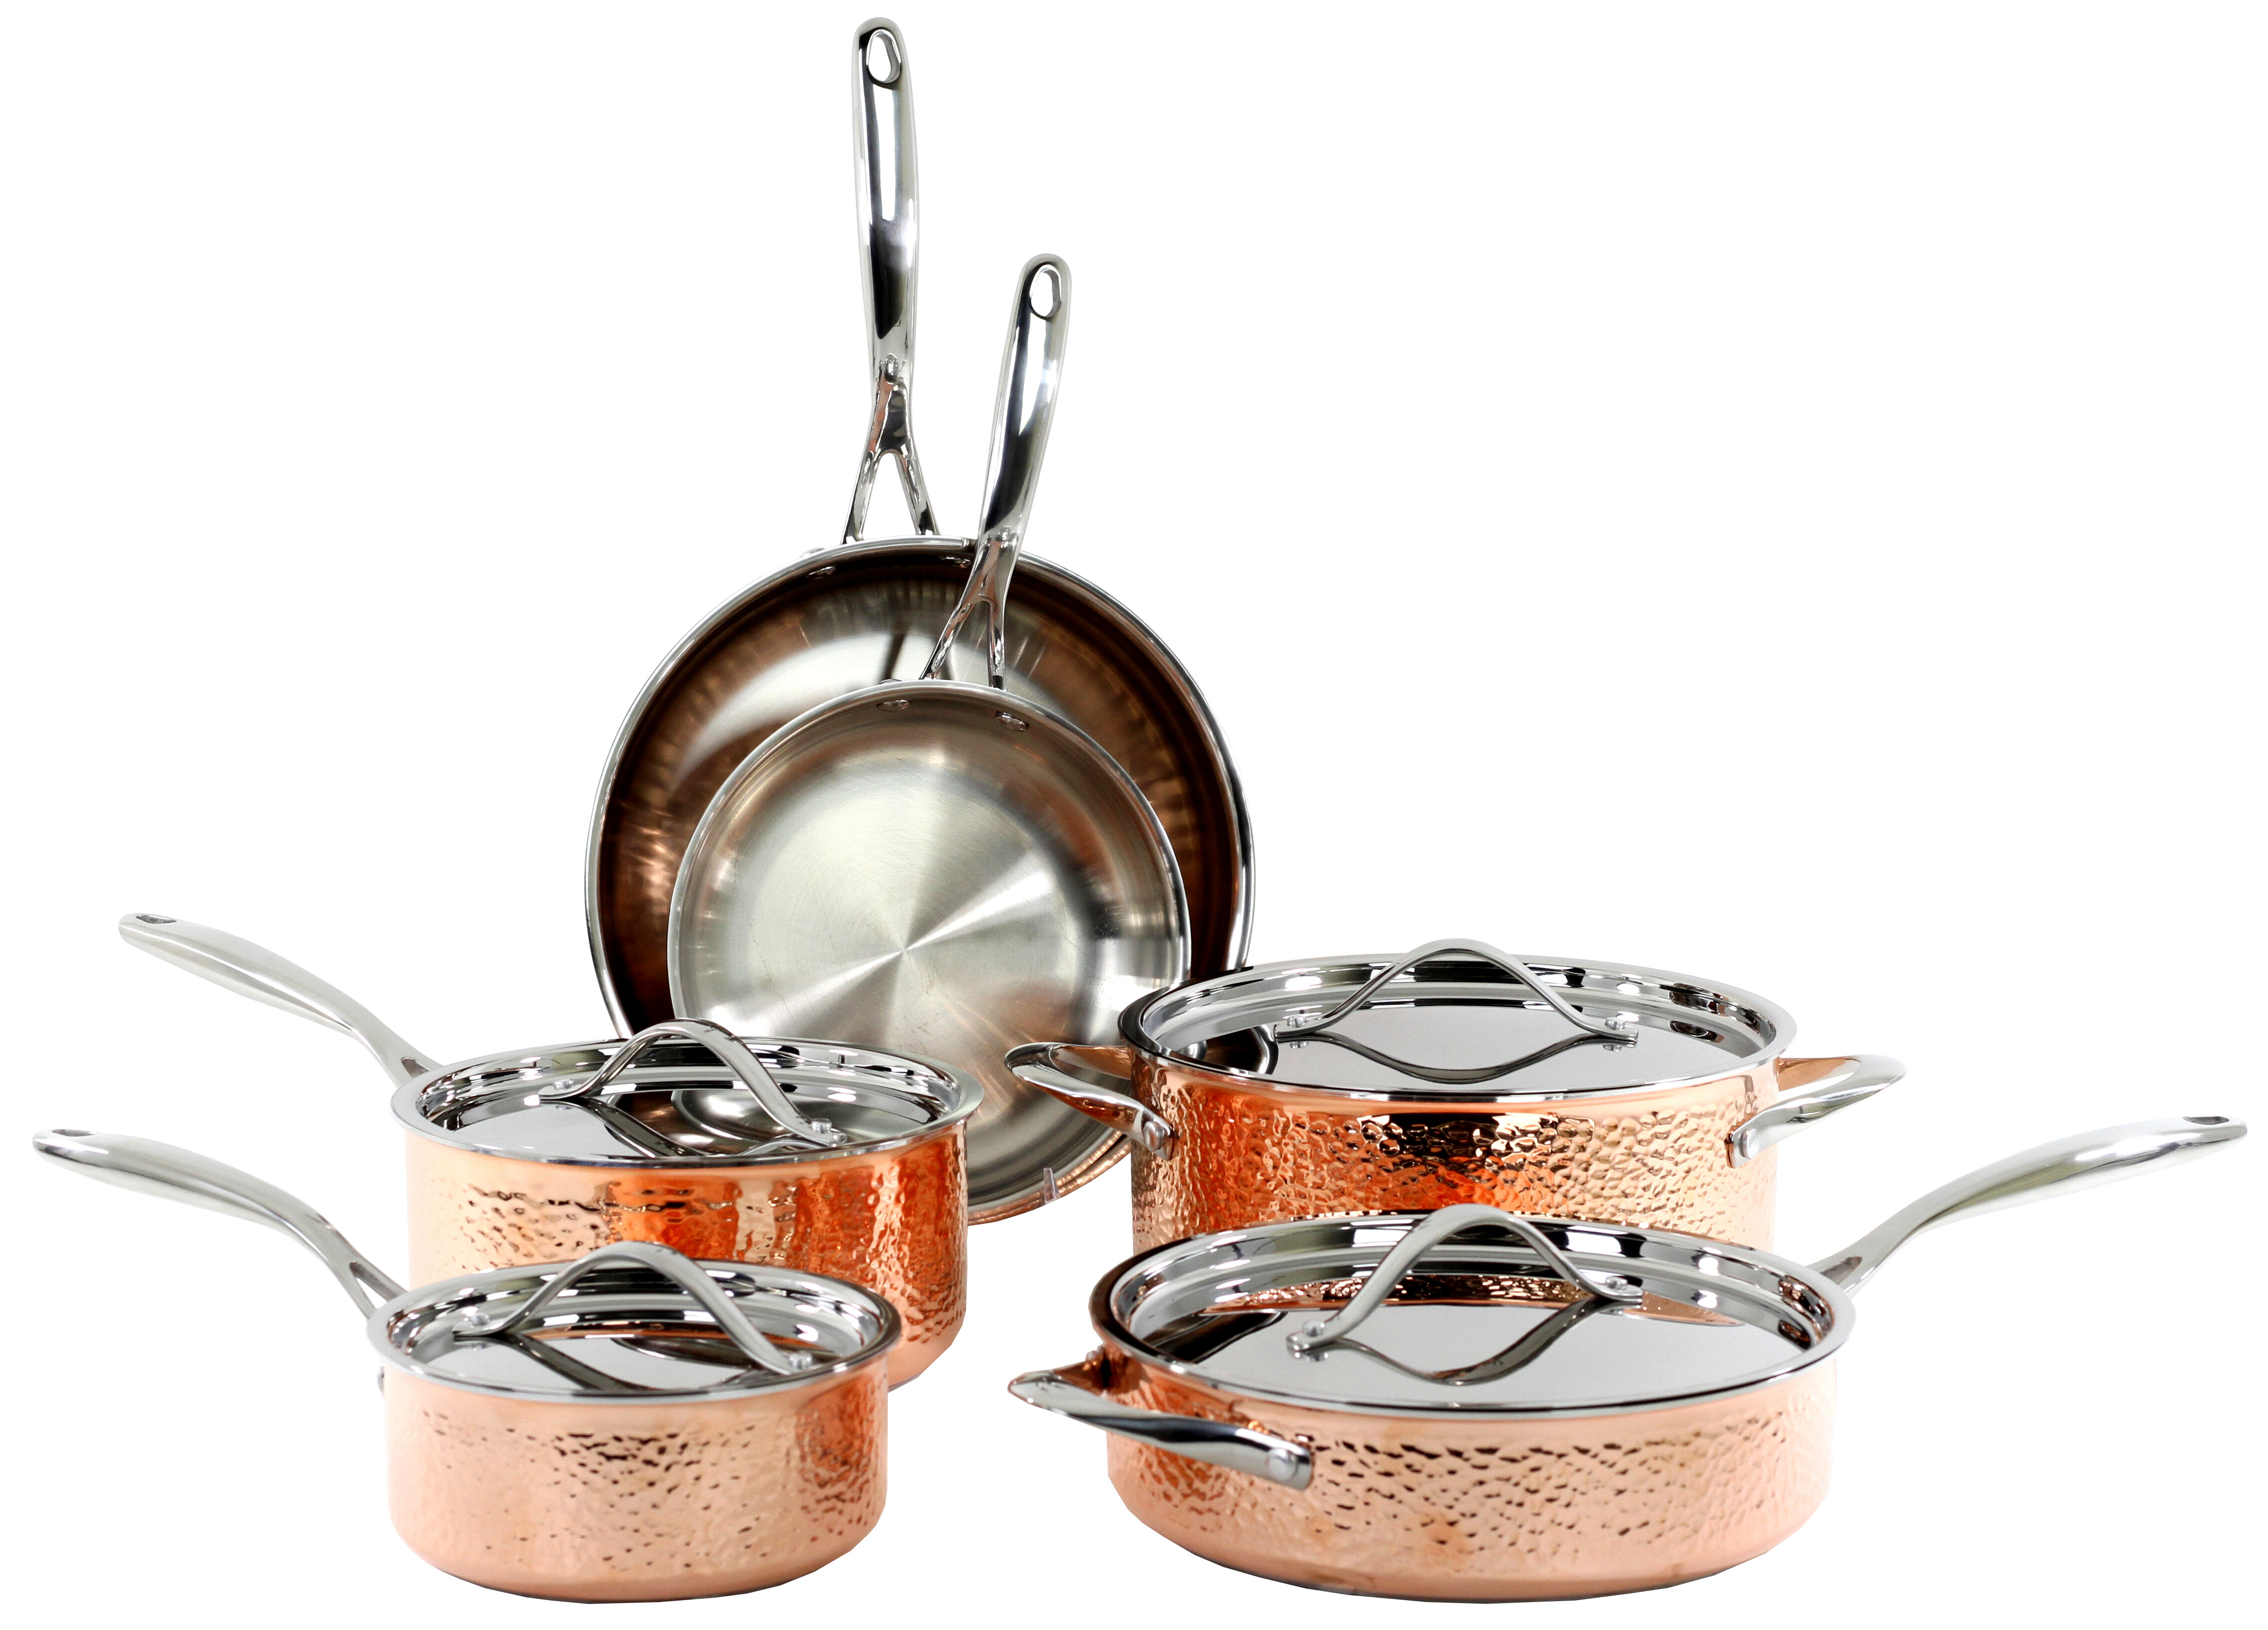 and Pans Set, Tri-Ply Stainless Steel Hammered Kitchen Cookware